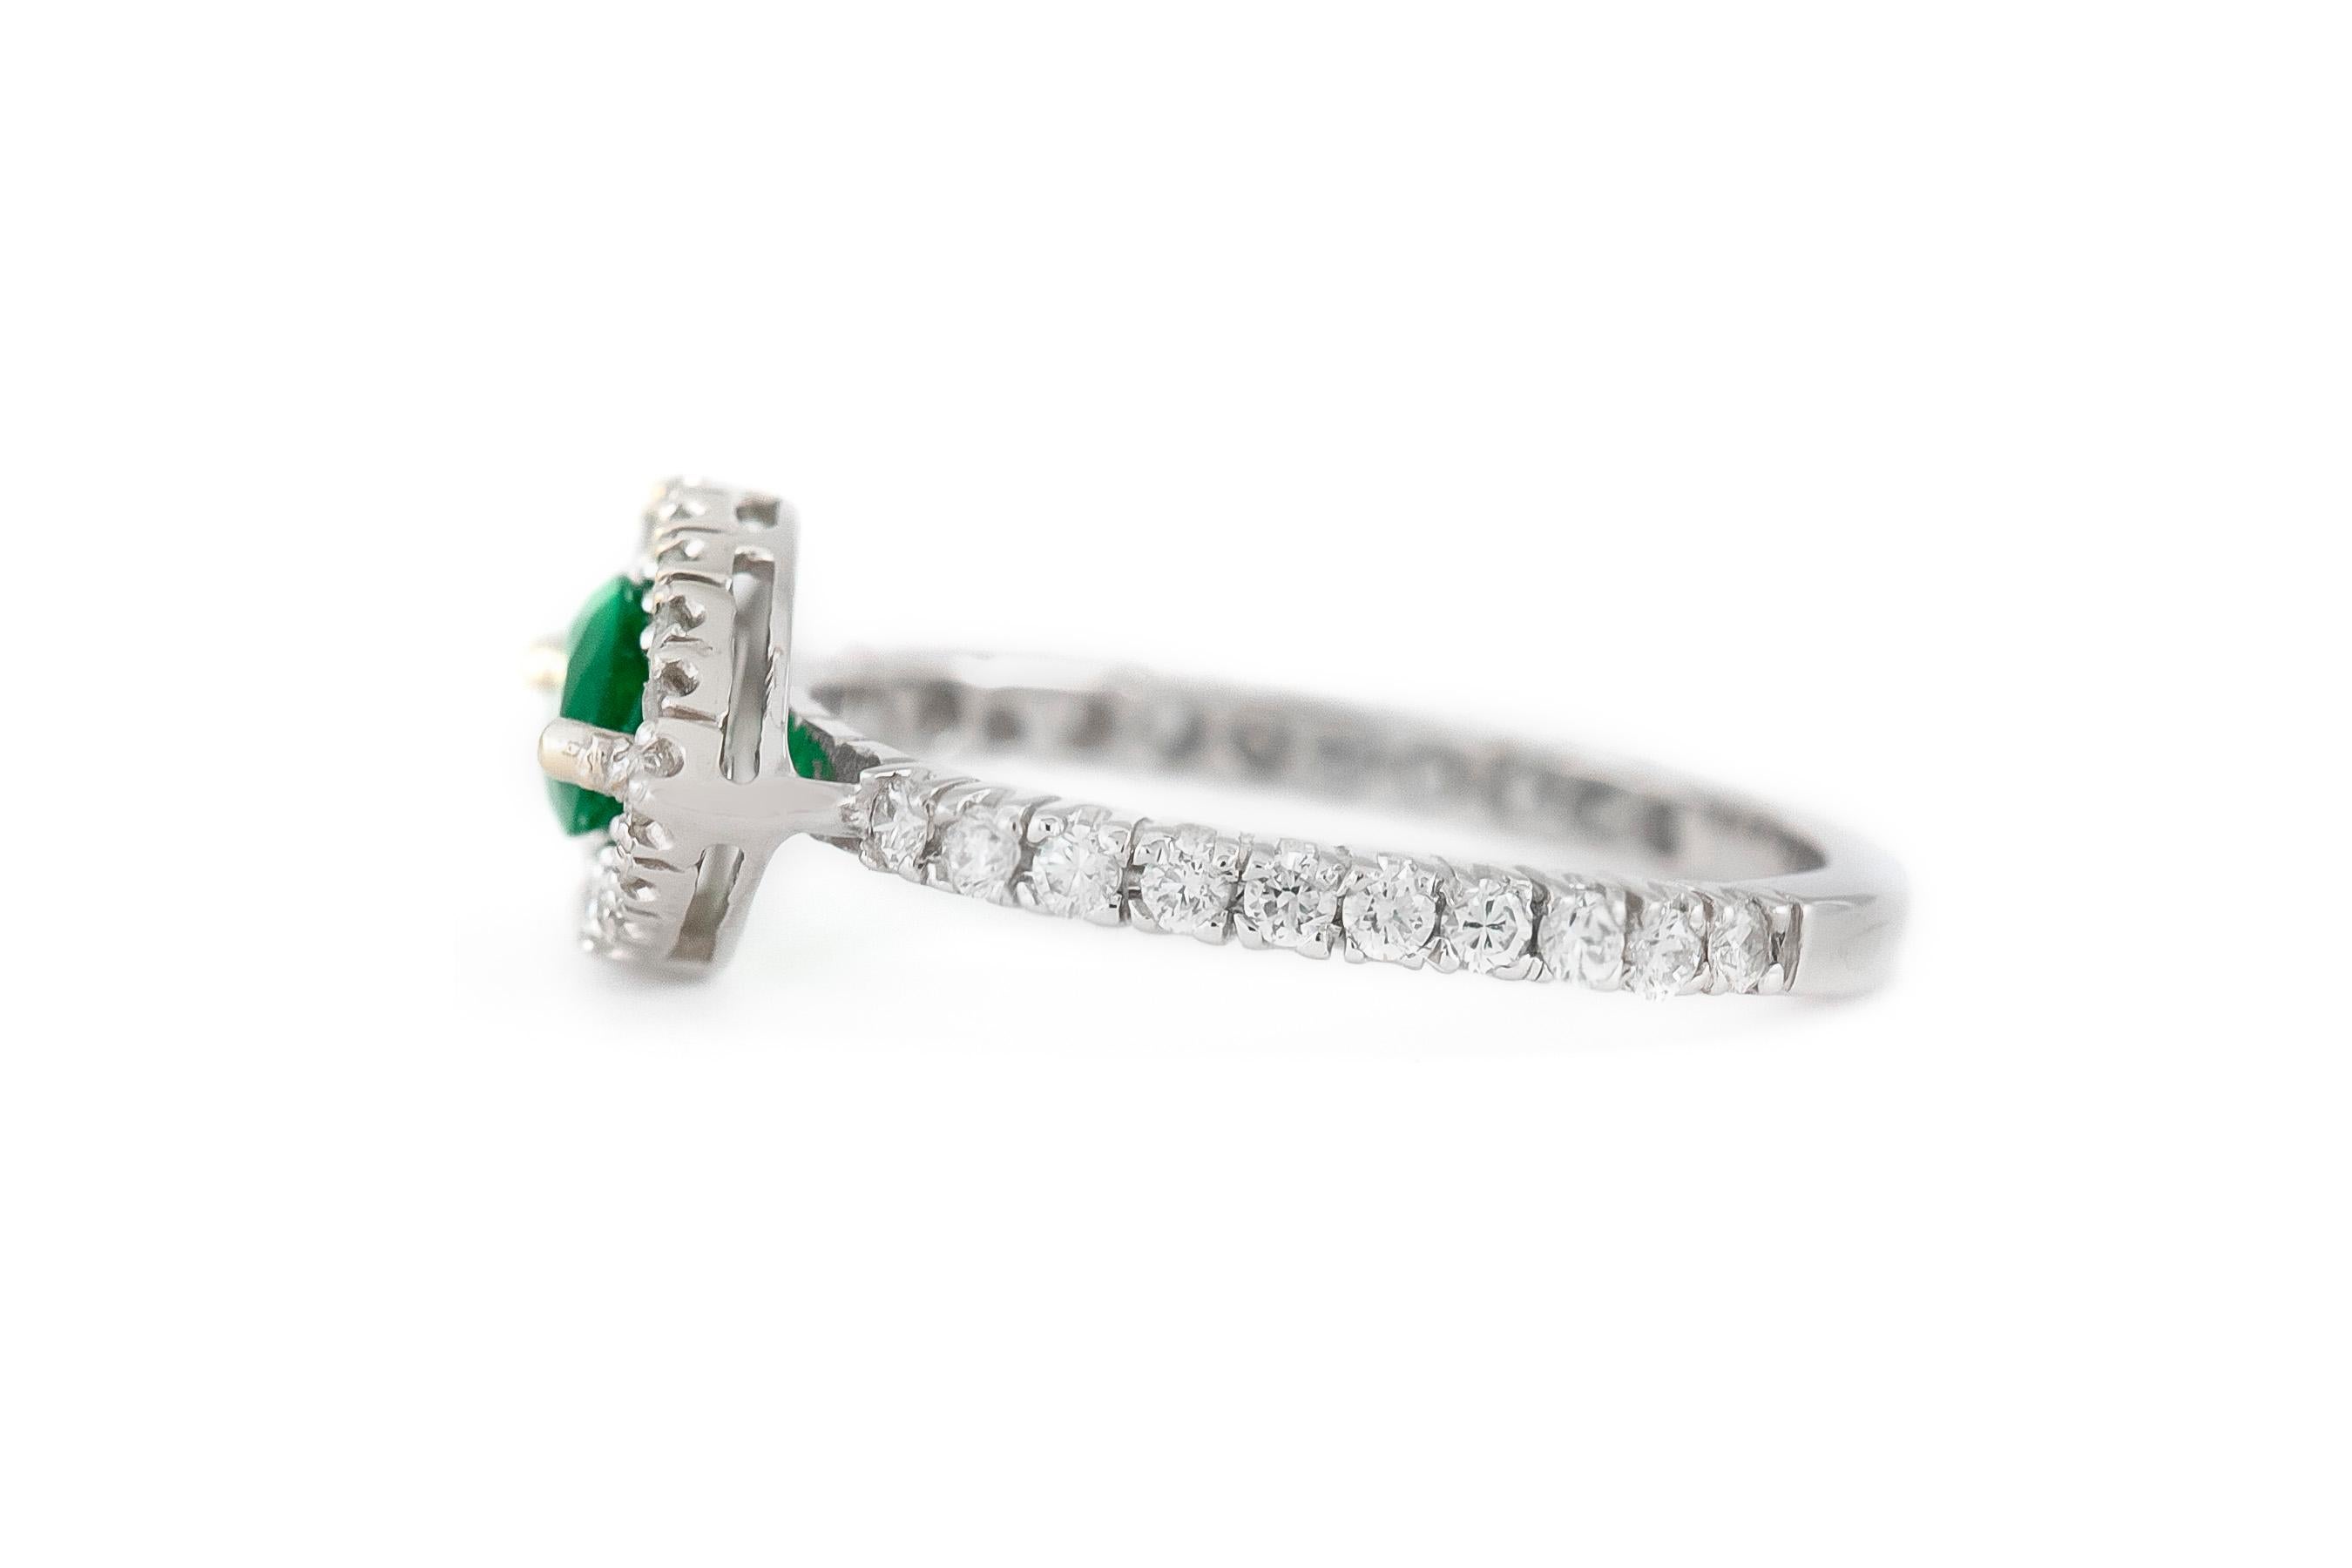 The ring is finely crafted in 18k white gold with center stone emerald weighing approximately total of 0.53 carat and diamonds weighing approximately total of 0.48 carat.
Circa 2000.
